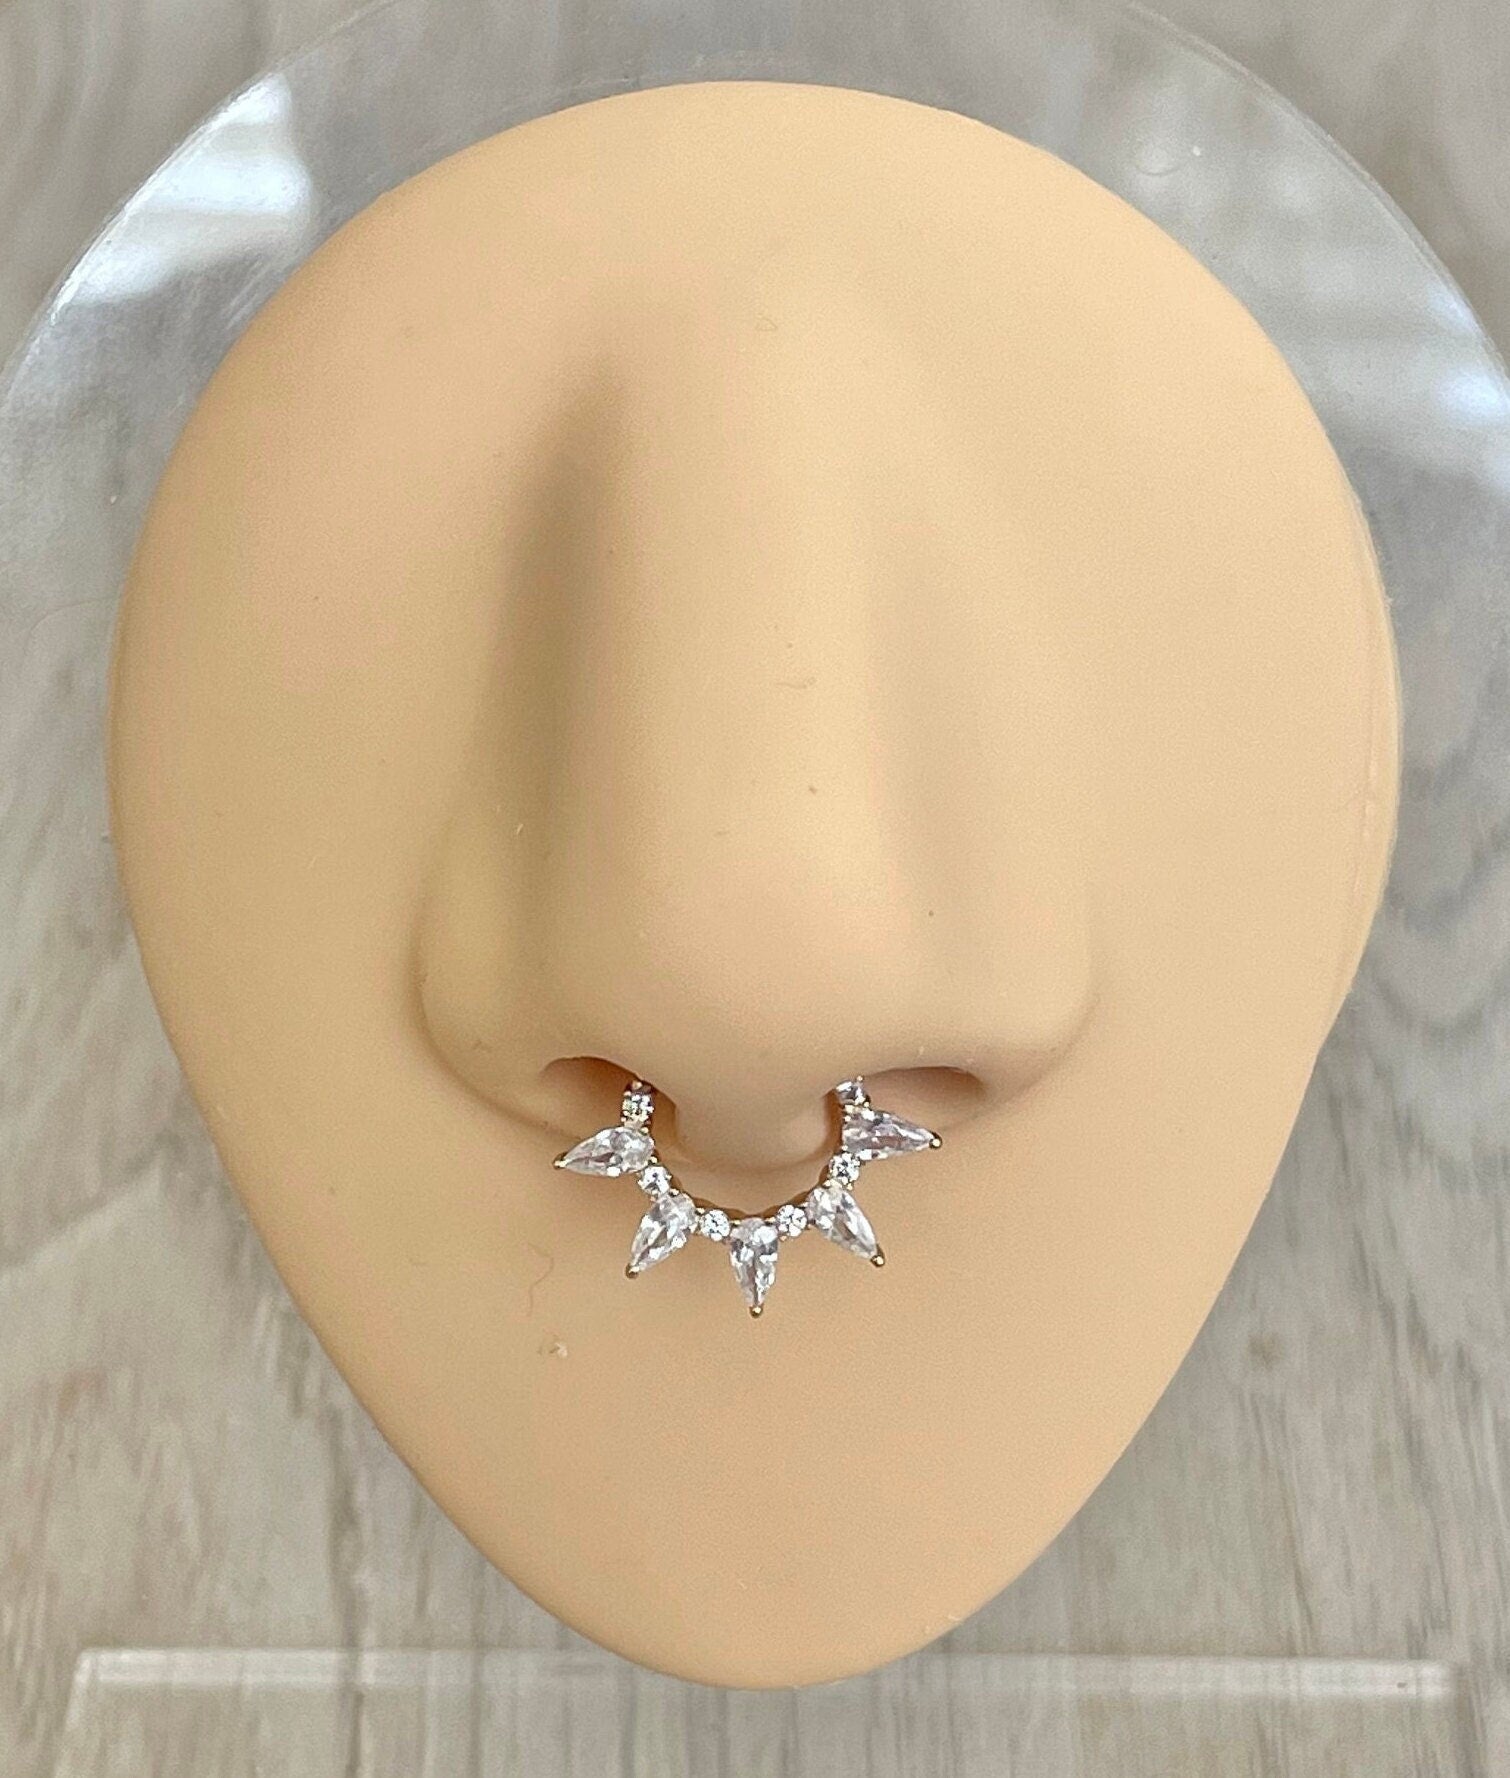 Solid Gold CZ Septum Ring (16G | 8mm or 10mm | 14k Solid Gold | White Gold or Yellow Gold)Solid Gold CZ Septum Piercing (16G | 8mm or 10mm | 14k Solid Gold | White or Yellow Gold)